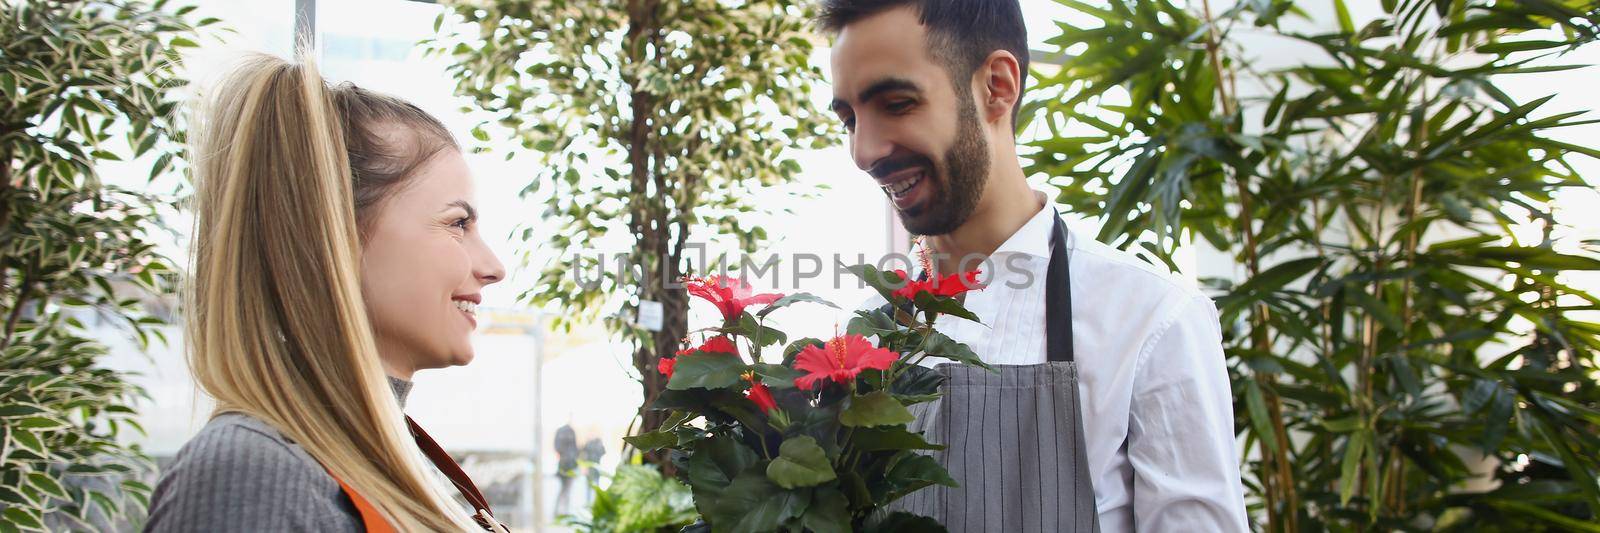 Portrait of man consultant gives flowers in pot to his colleague, show liking for her. Sweet and lovely moment between young people. Flirt at work concept